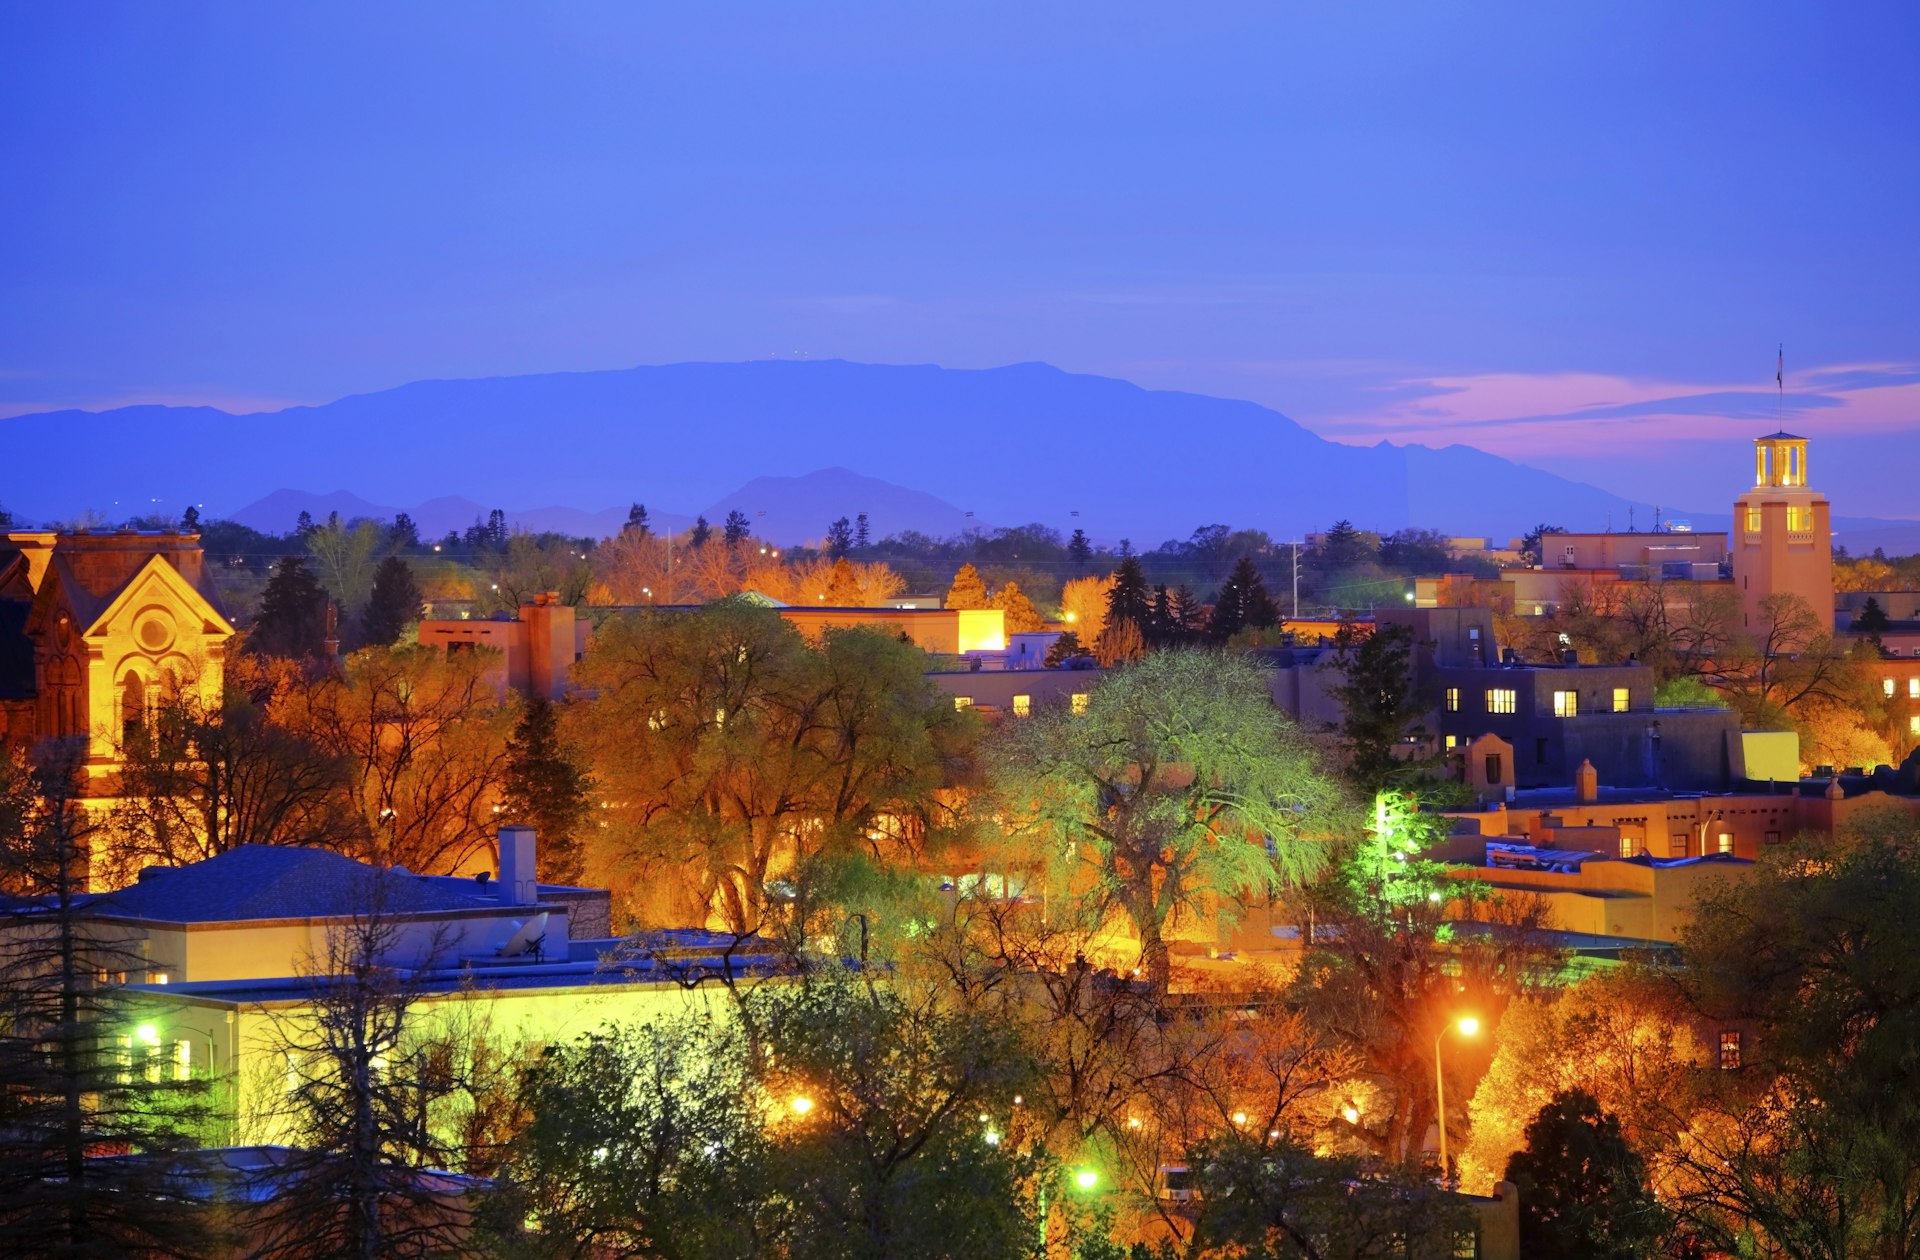 The lights come on as the sun sets over downtown Santa Fe